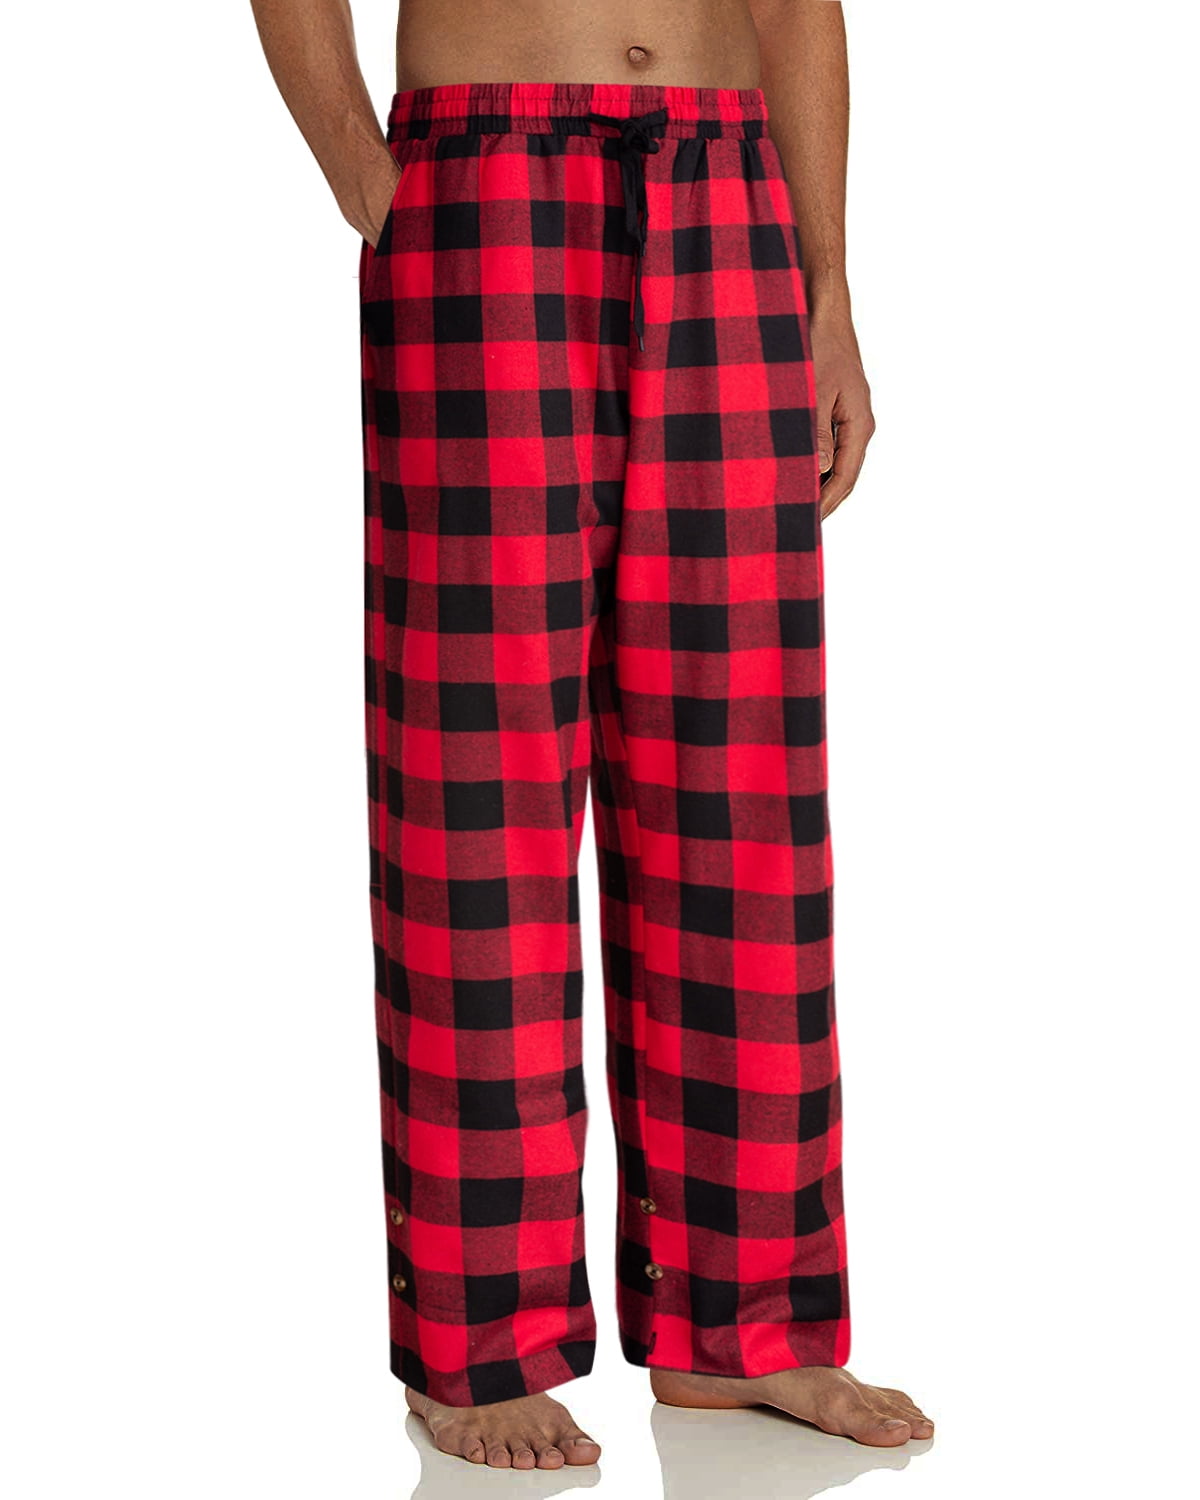 DARESAY 3 Pack: Plaid Pajama Pants For Men – Mens Flannel Pajama Pants -  Mens PJ Pants With Pockets & Button Fly (Up To 3XL) - Walmart.com